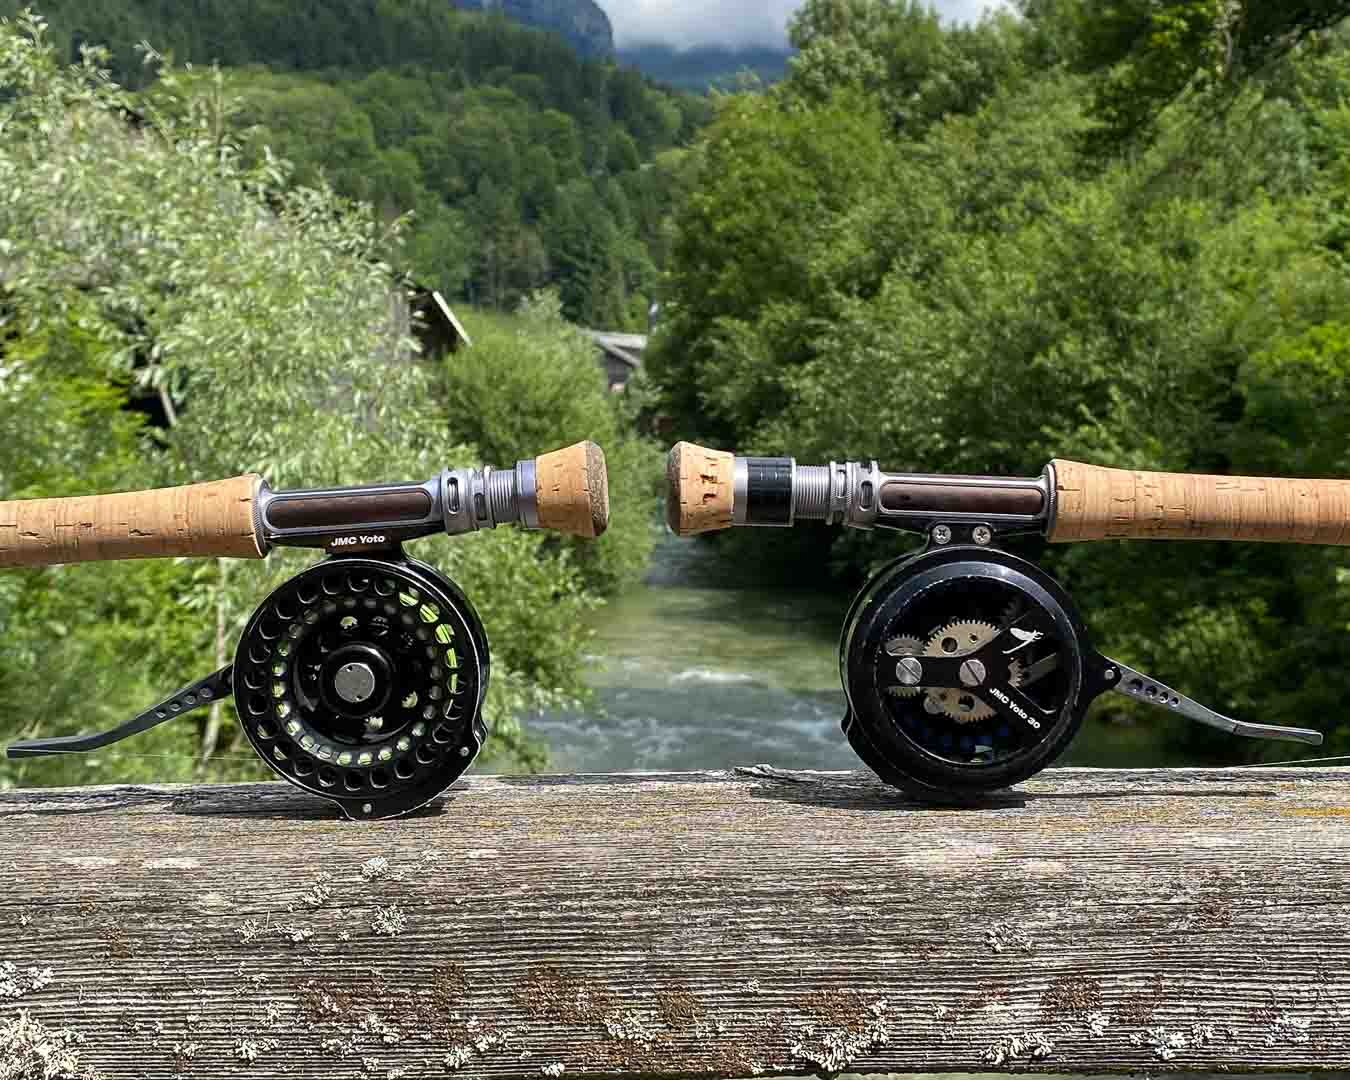 Automatic Fly Reel